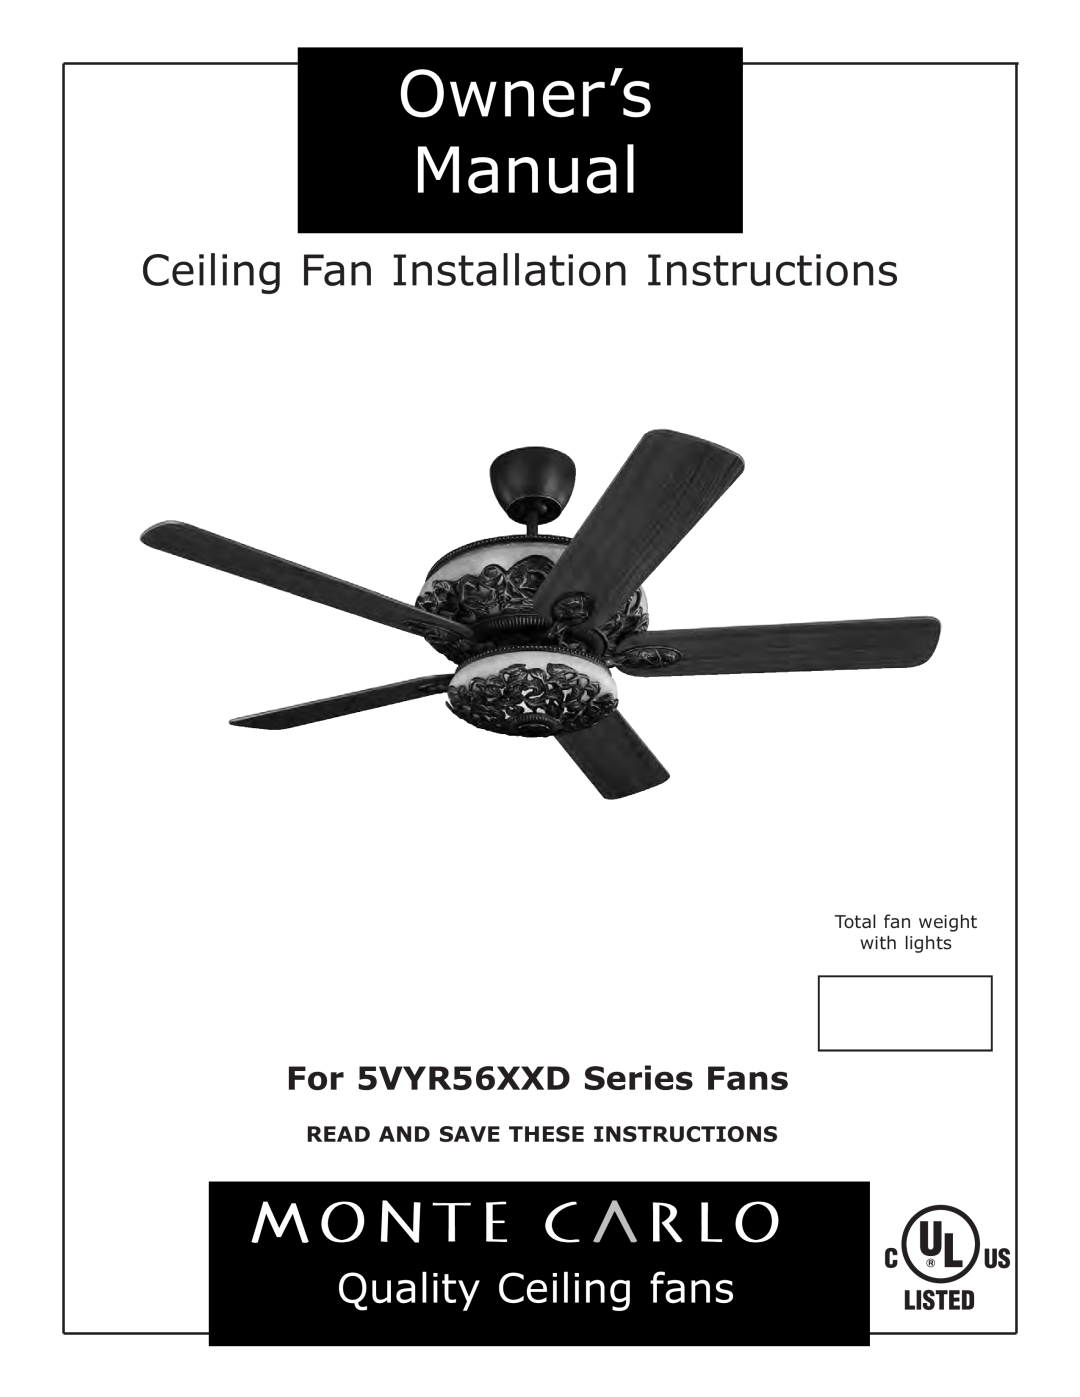 Monte Carlo Fan Company 5VYR56XXD owner manual Ceiling Fan Installation Instructions, Quality Ceiling fans 